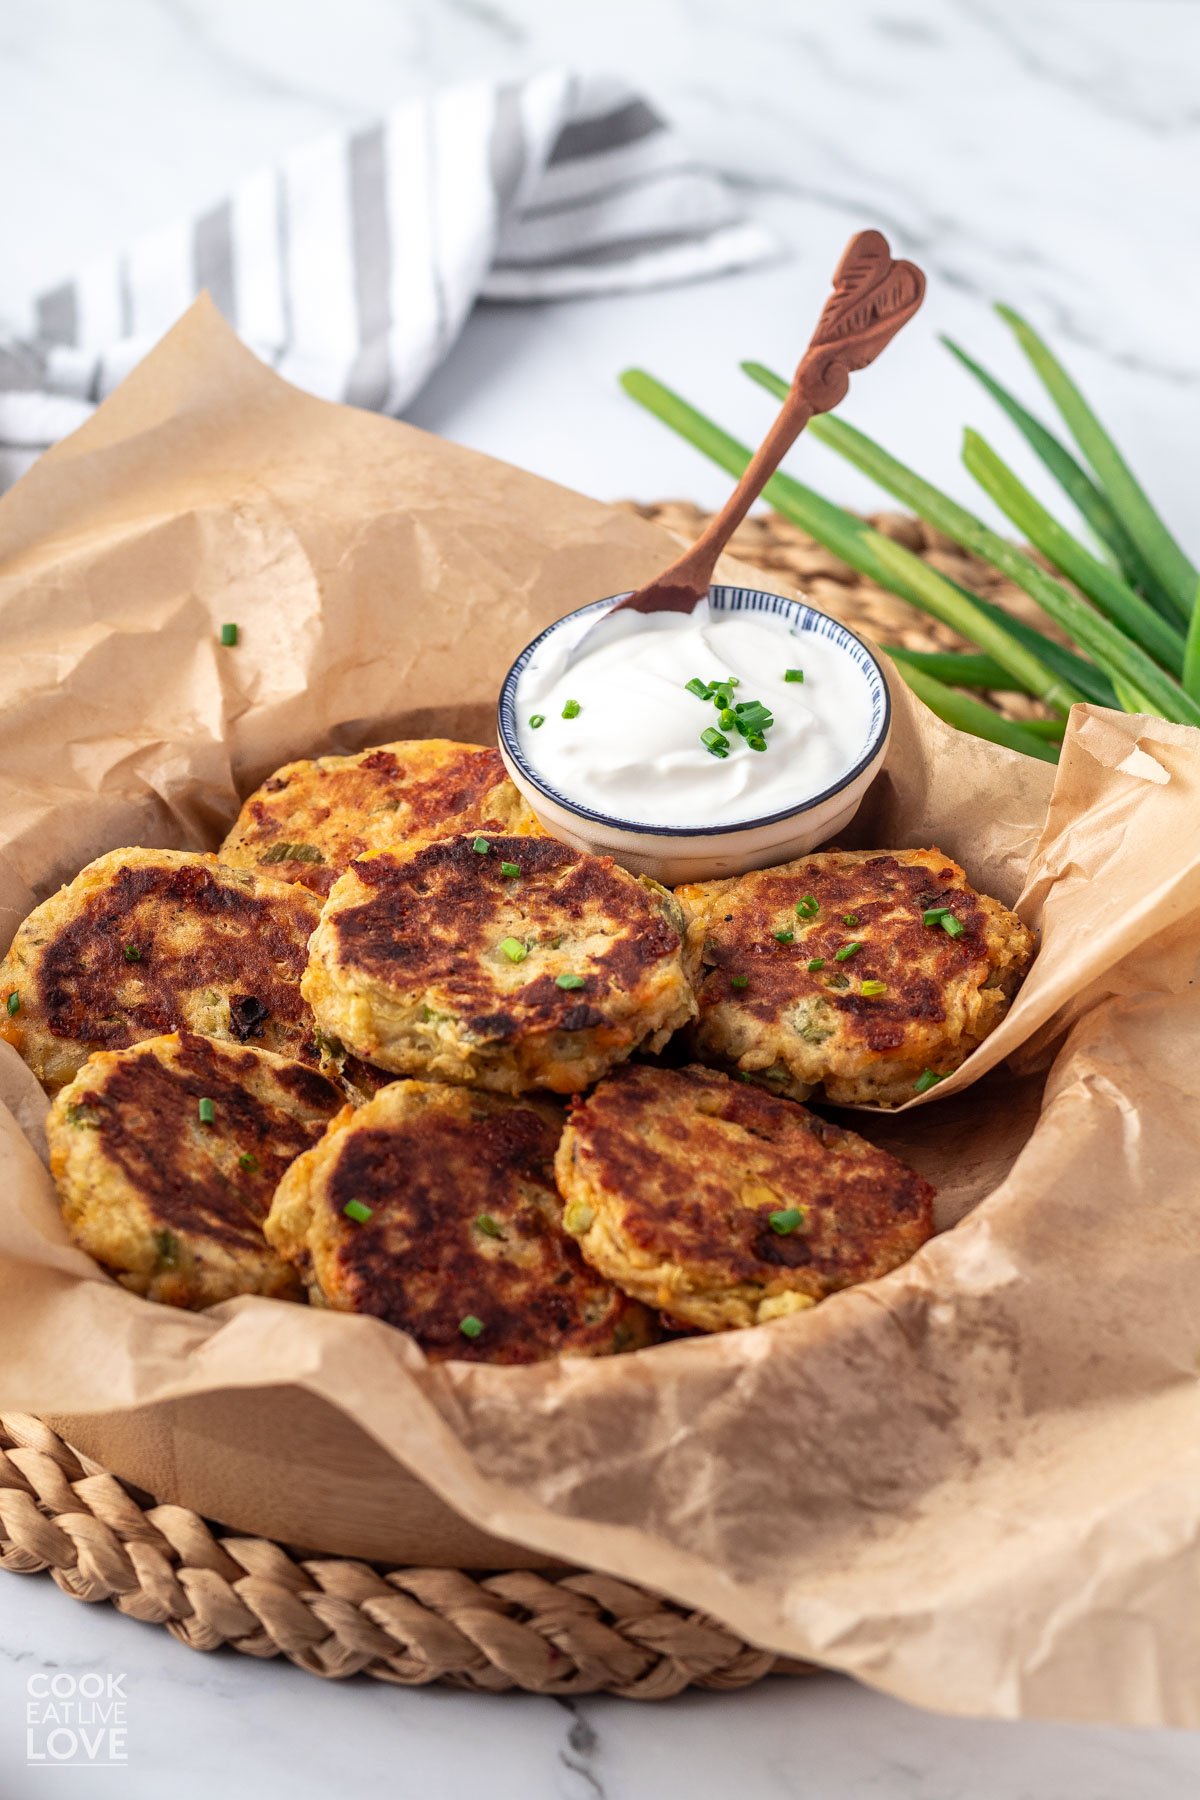 Potato fritters on parchment paper in a basket garnished with chives and a small dish of sour cream with a spoon in it.